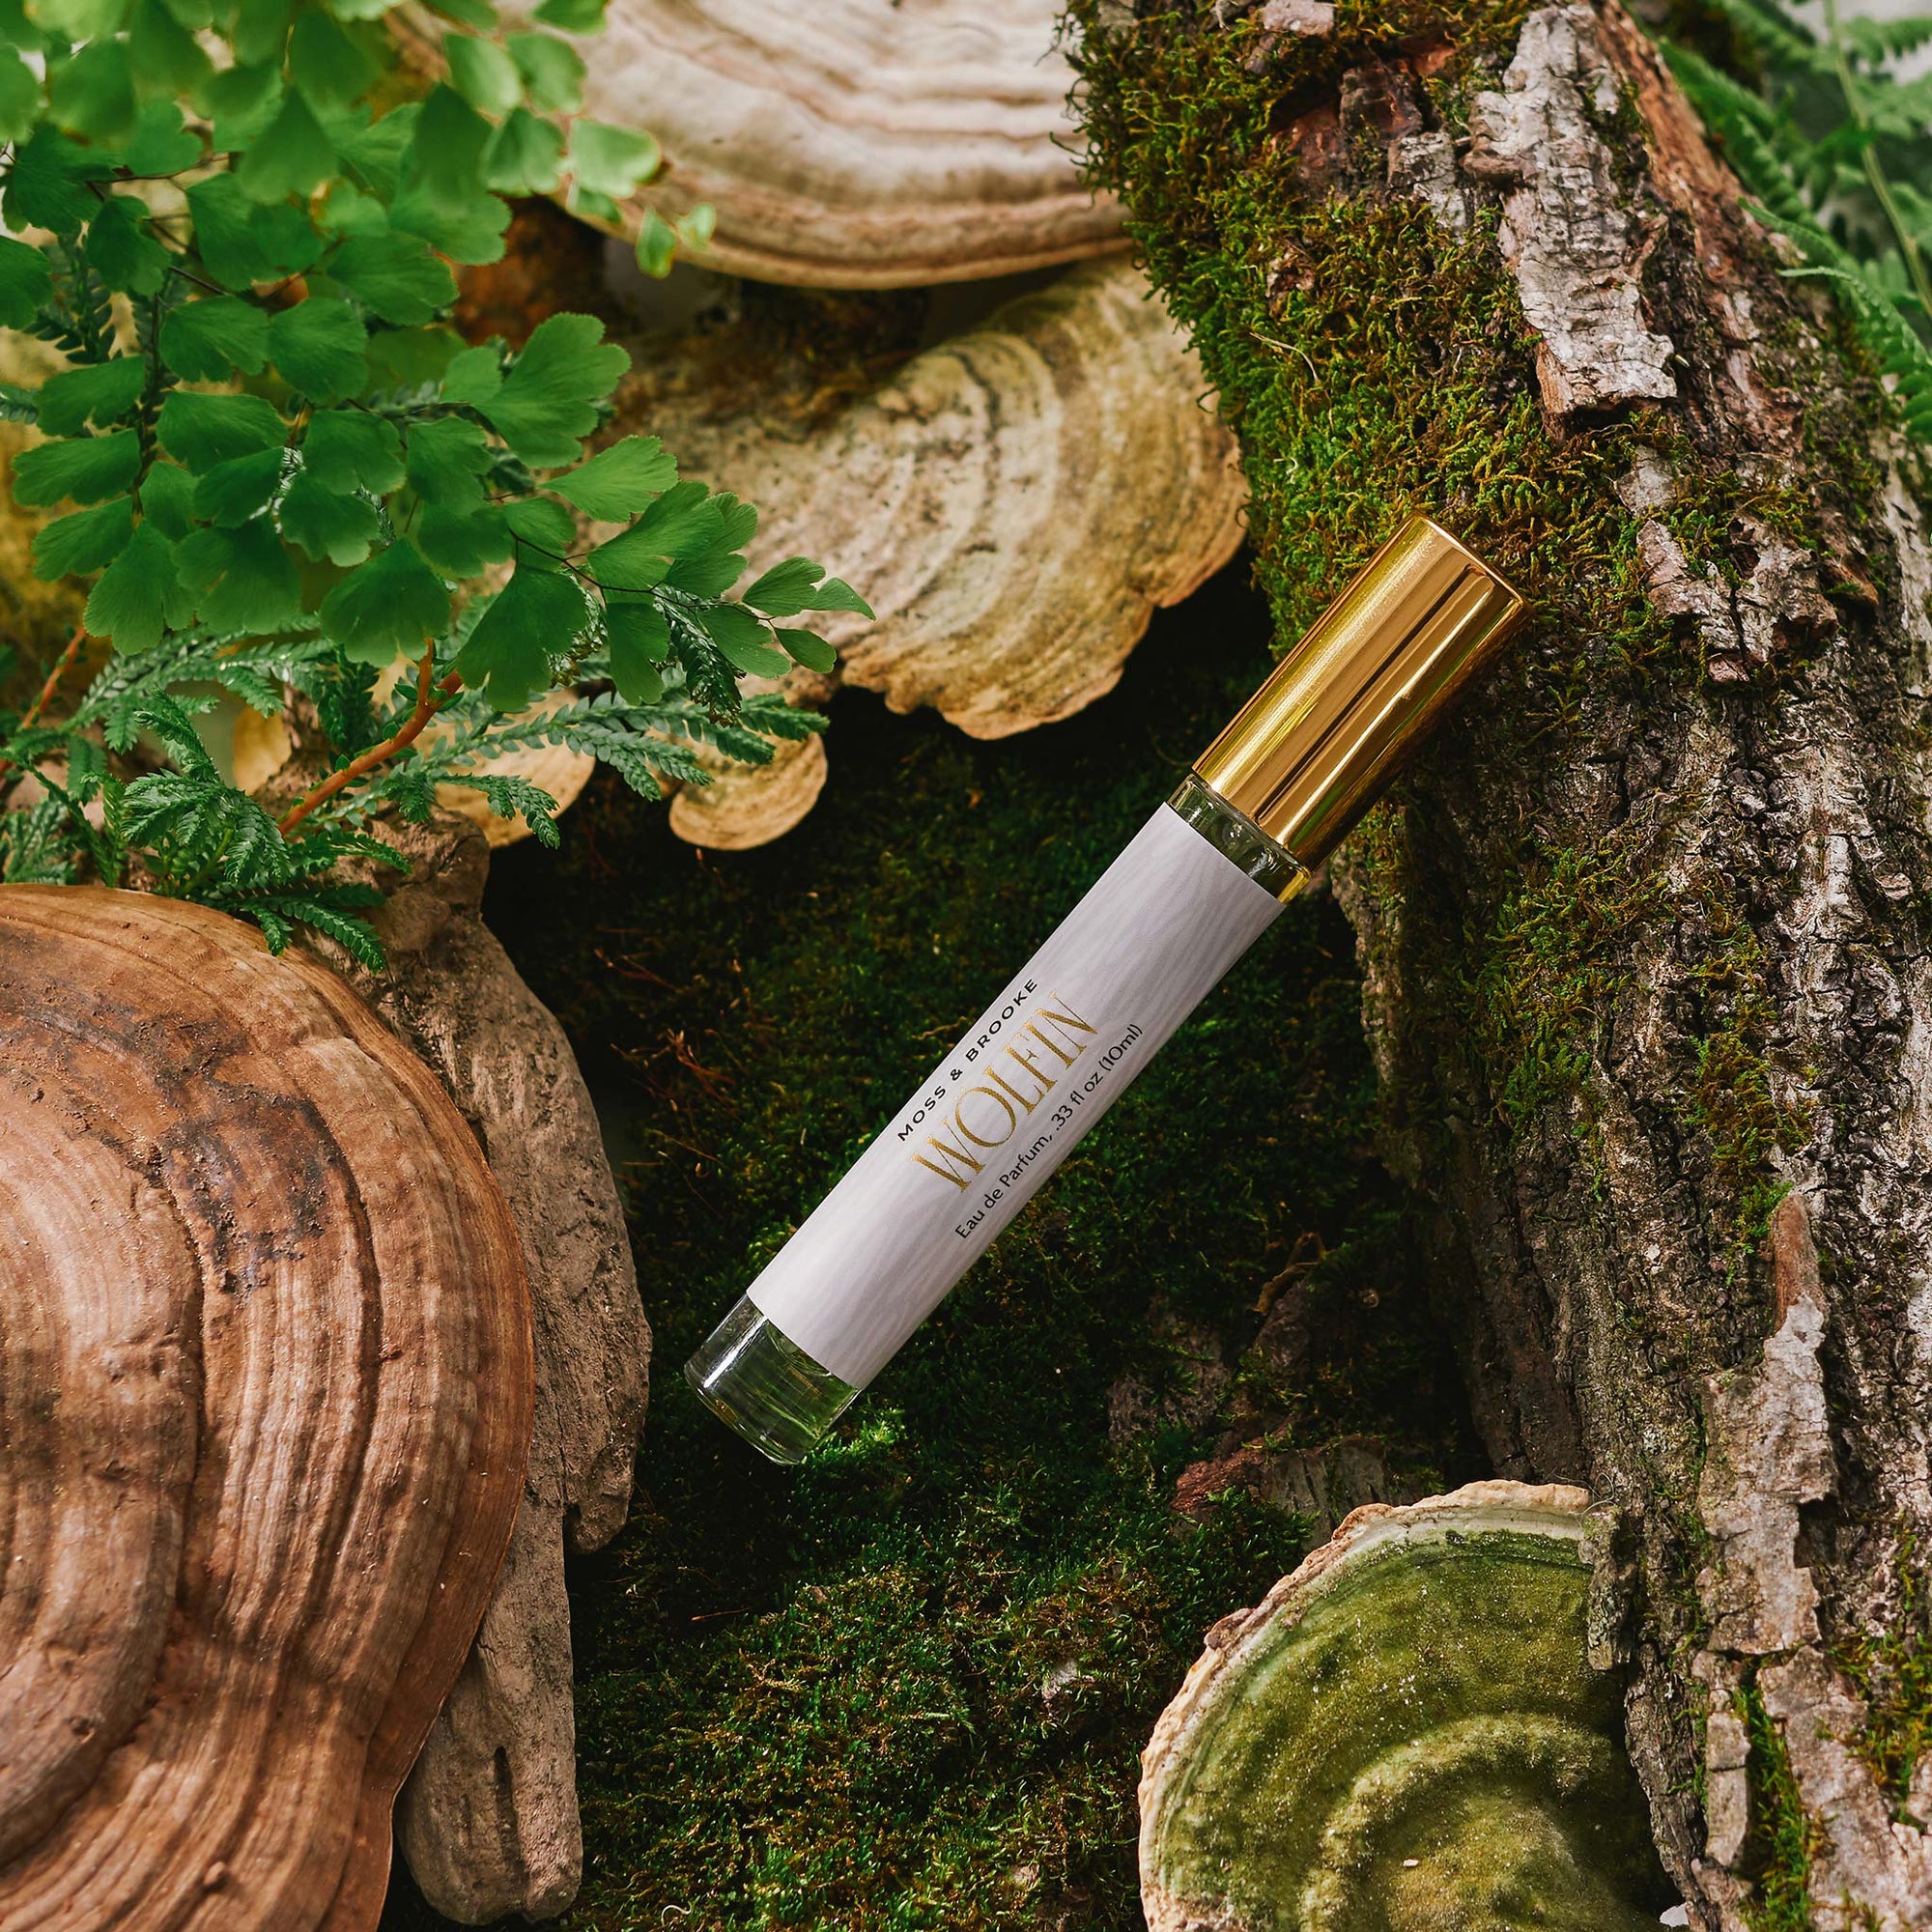 Image of Moss & Brooke Wolfin Eau de Perfum sitting in a forest background of moss and logs. The botanical inspired fragrance features plastic free packaging, the glass bottle with gold lid looking sophisticated with a minimal gold foil label.